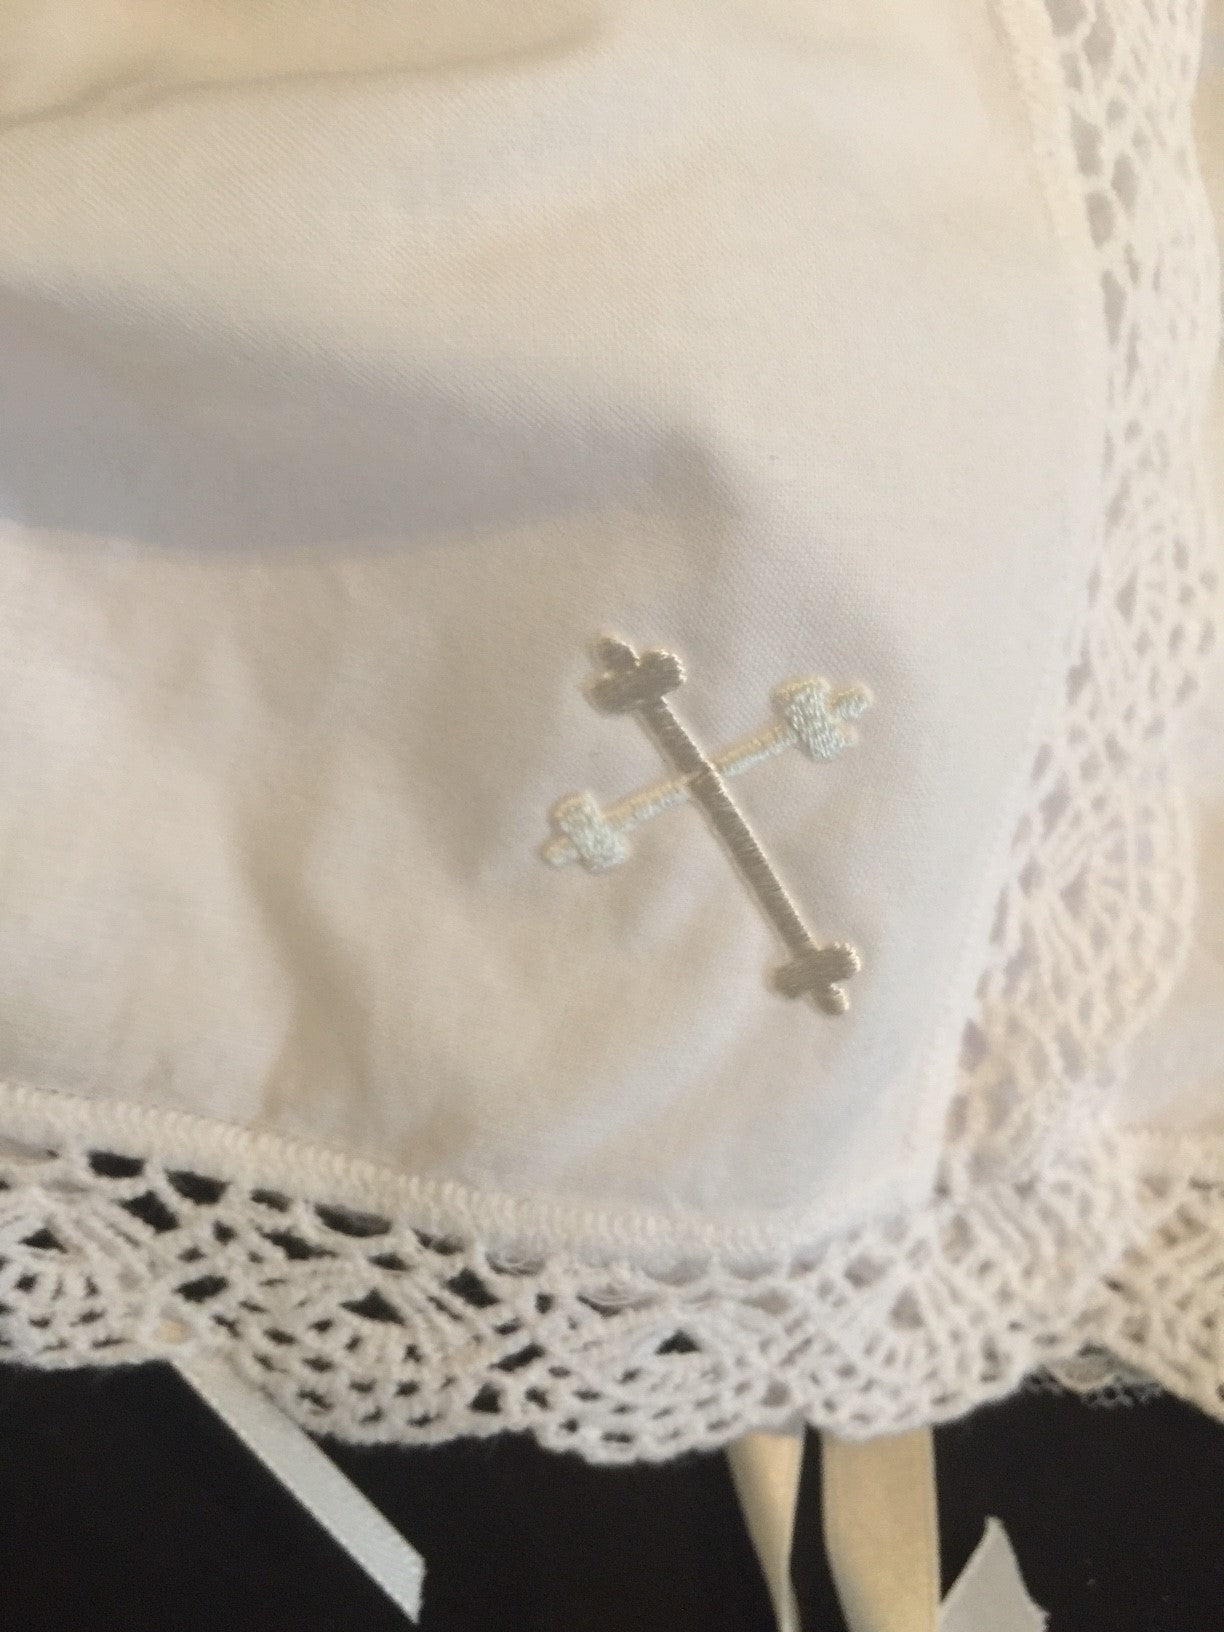 Hanky Bonnet with Embroidered Cross